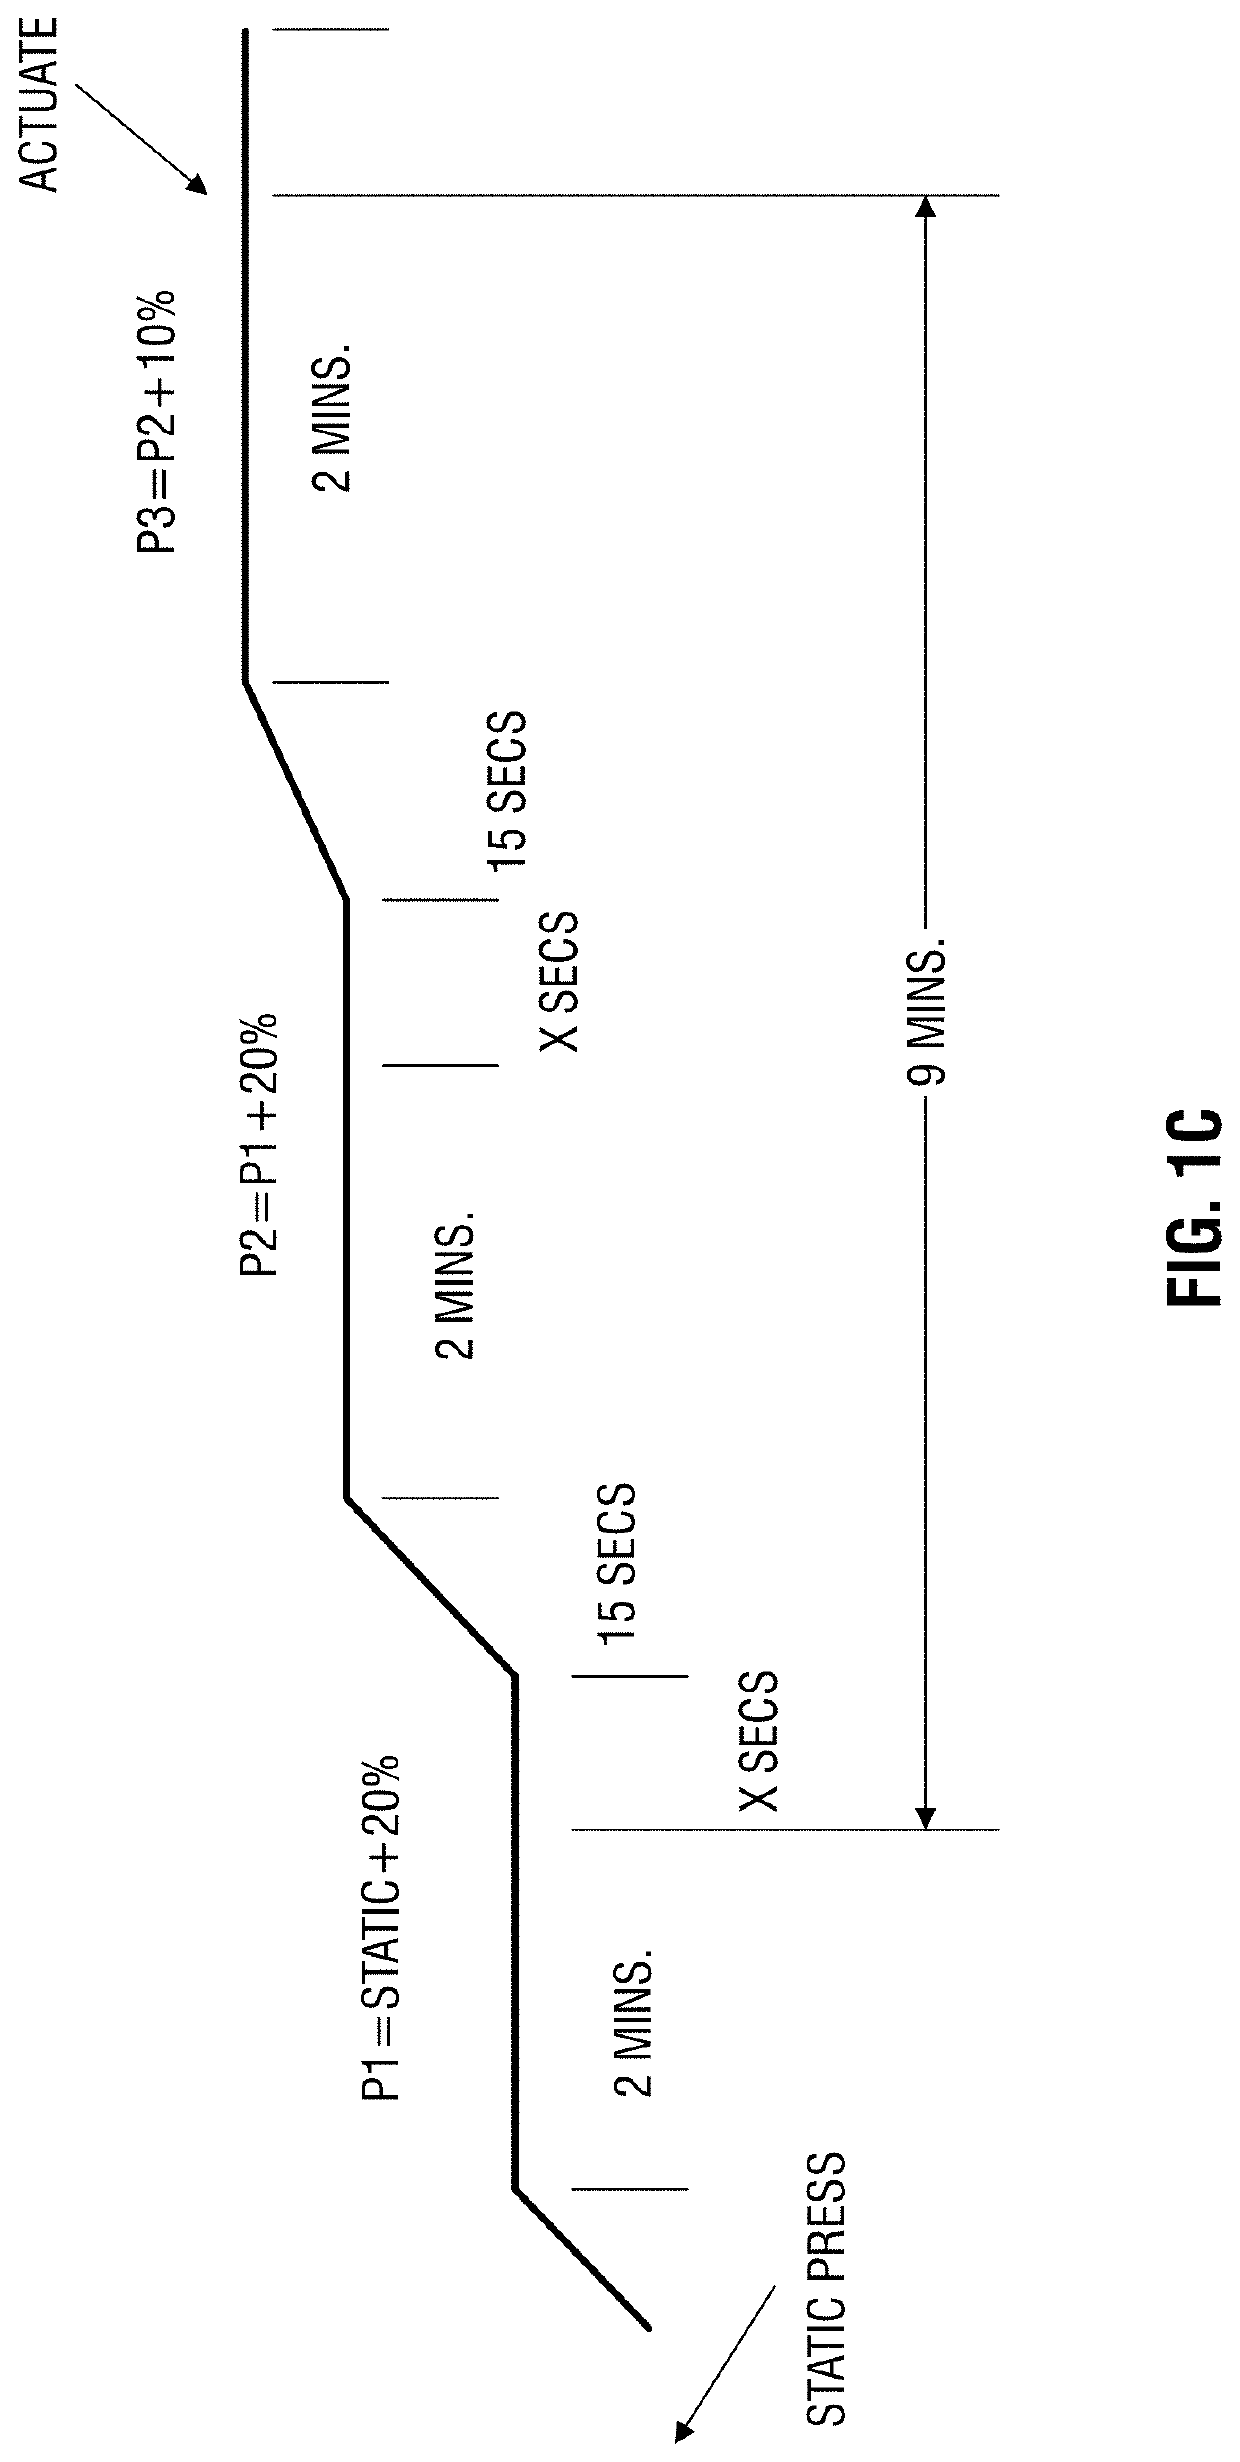 Downhole electronic triggering and actuation mechanism